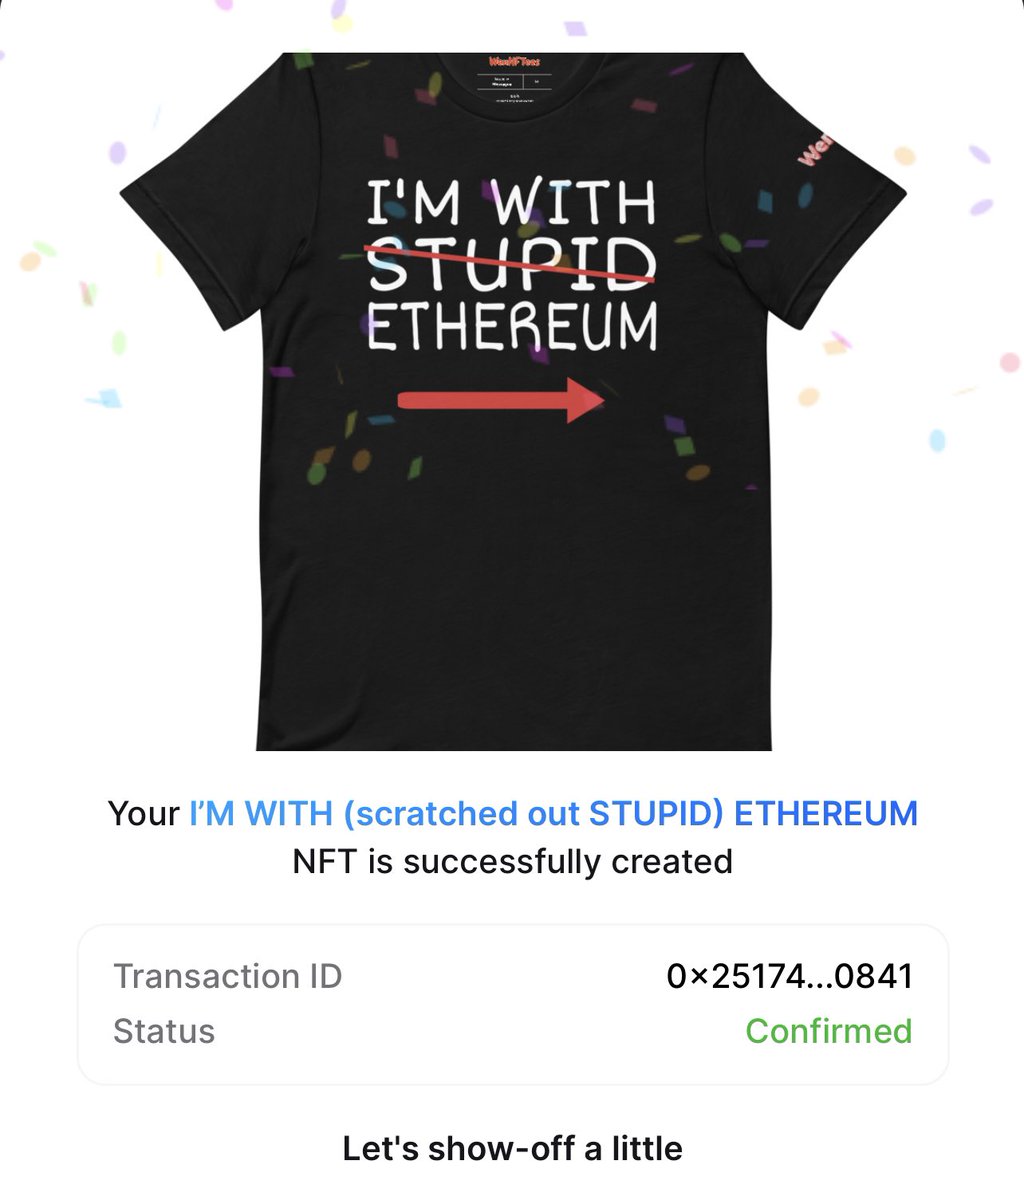 I’m on a roll ! Just minted the I’M WITH (scratched out STUPID) @ETHEREUM variant #phygital #nft on @rarible! Soon to come to my online shop!

#builtonRarible #StandForRoyalties @WenNFTees @wennftcom